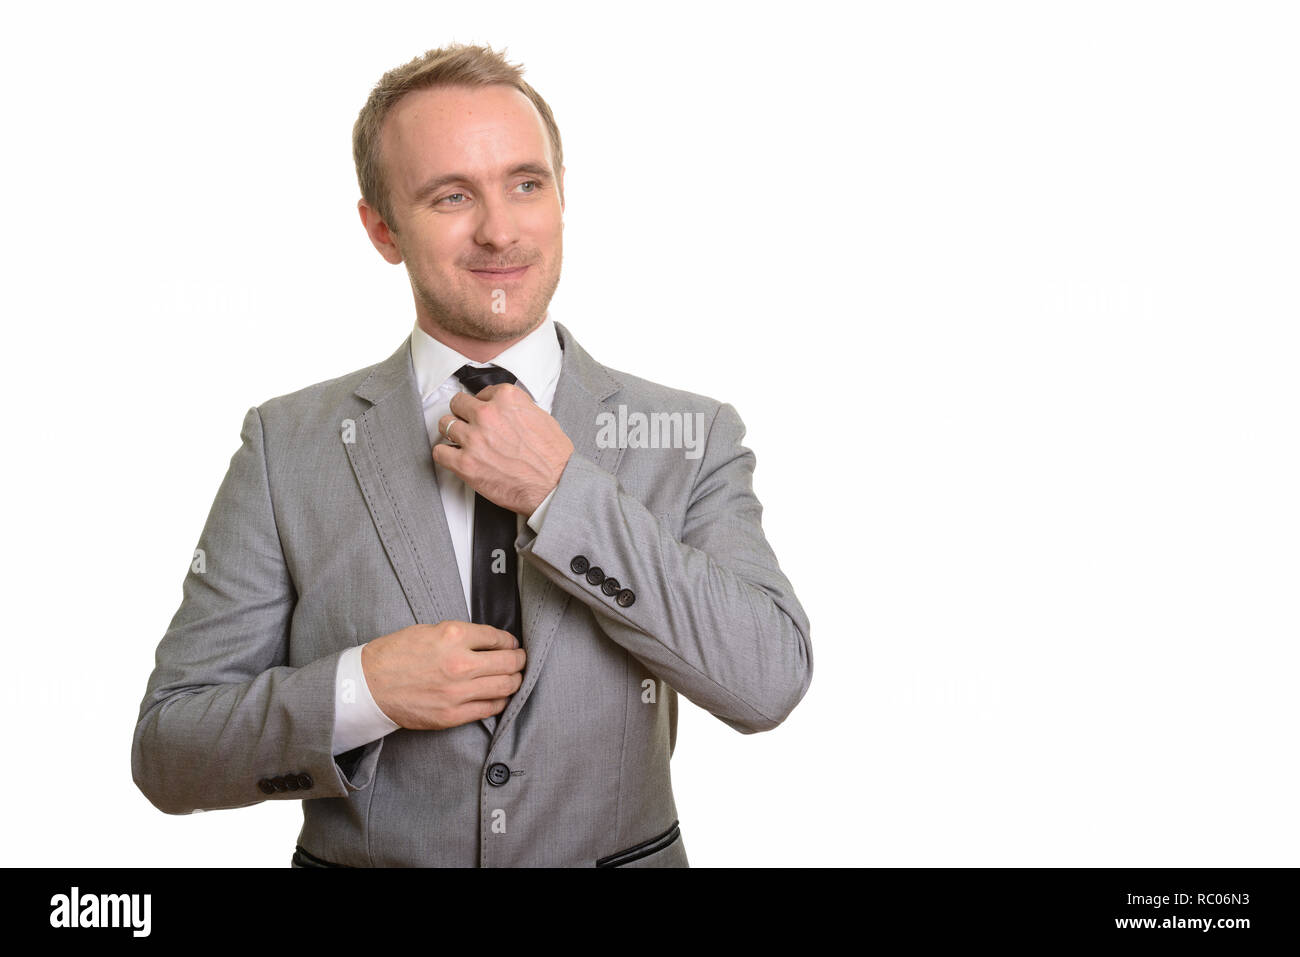 Handsome Caucasian businessman fixing his tie isolated against white background Stock Photo